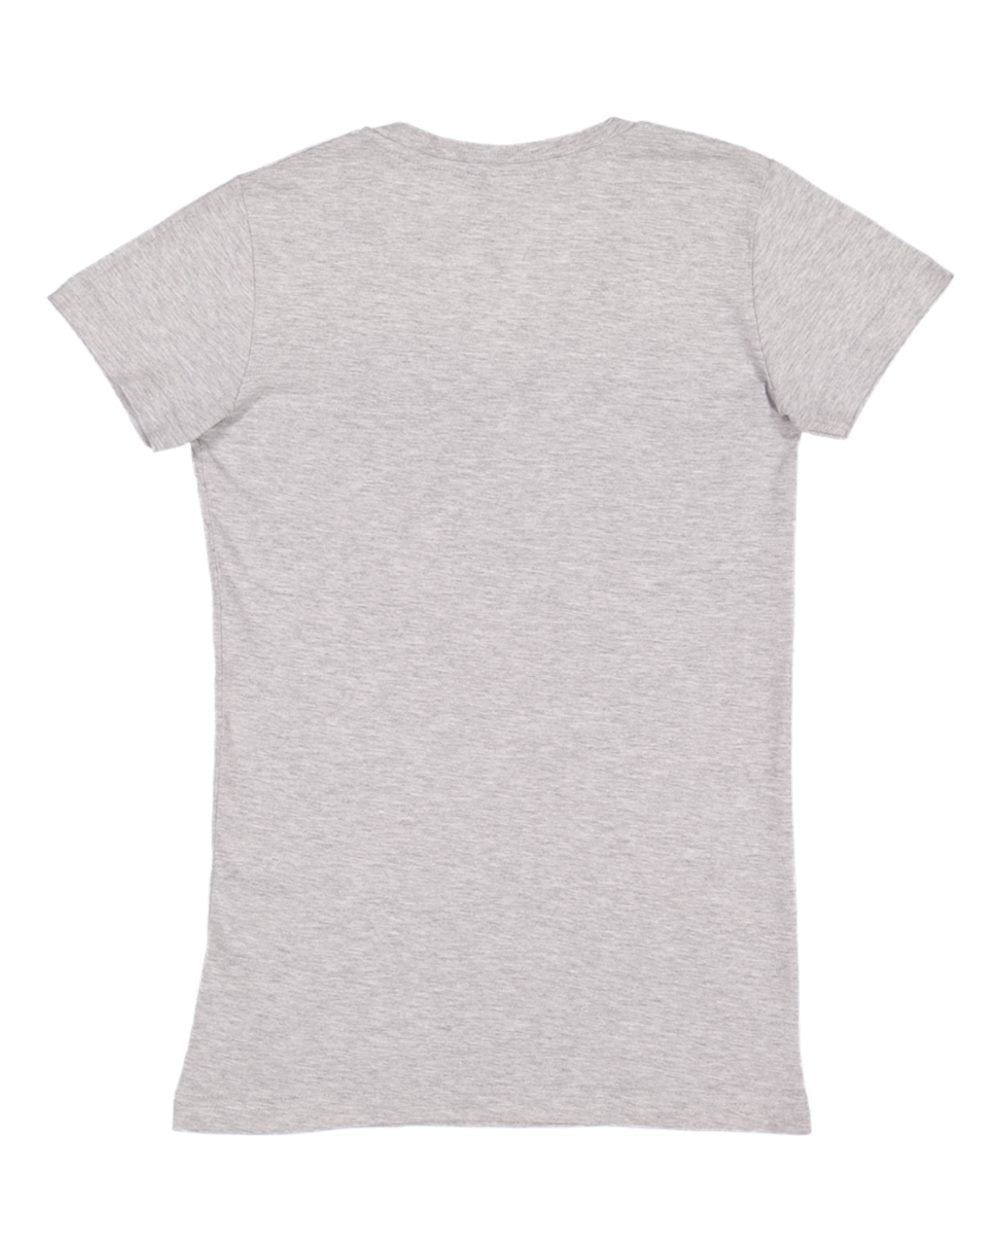 Ladies (Junior) Fitted  --  (V-Neck) T-Shirt  -- 100% Cotton -- Heather Color